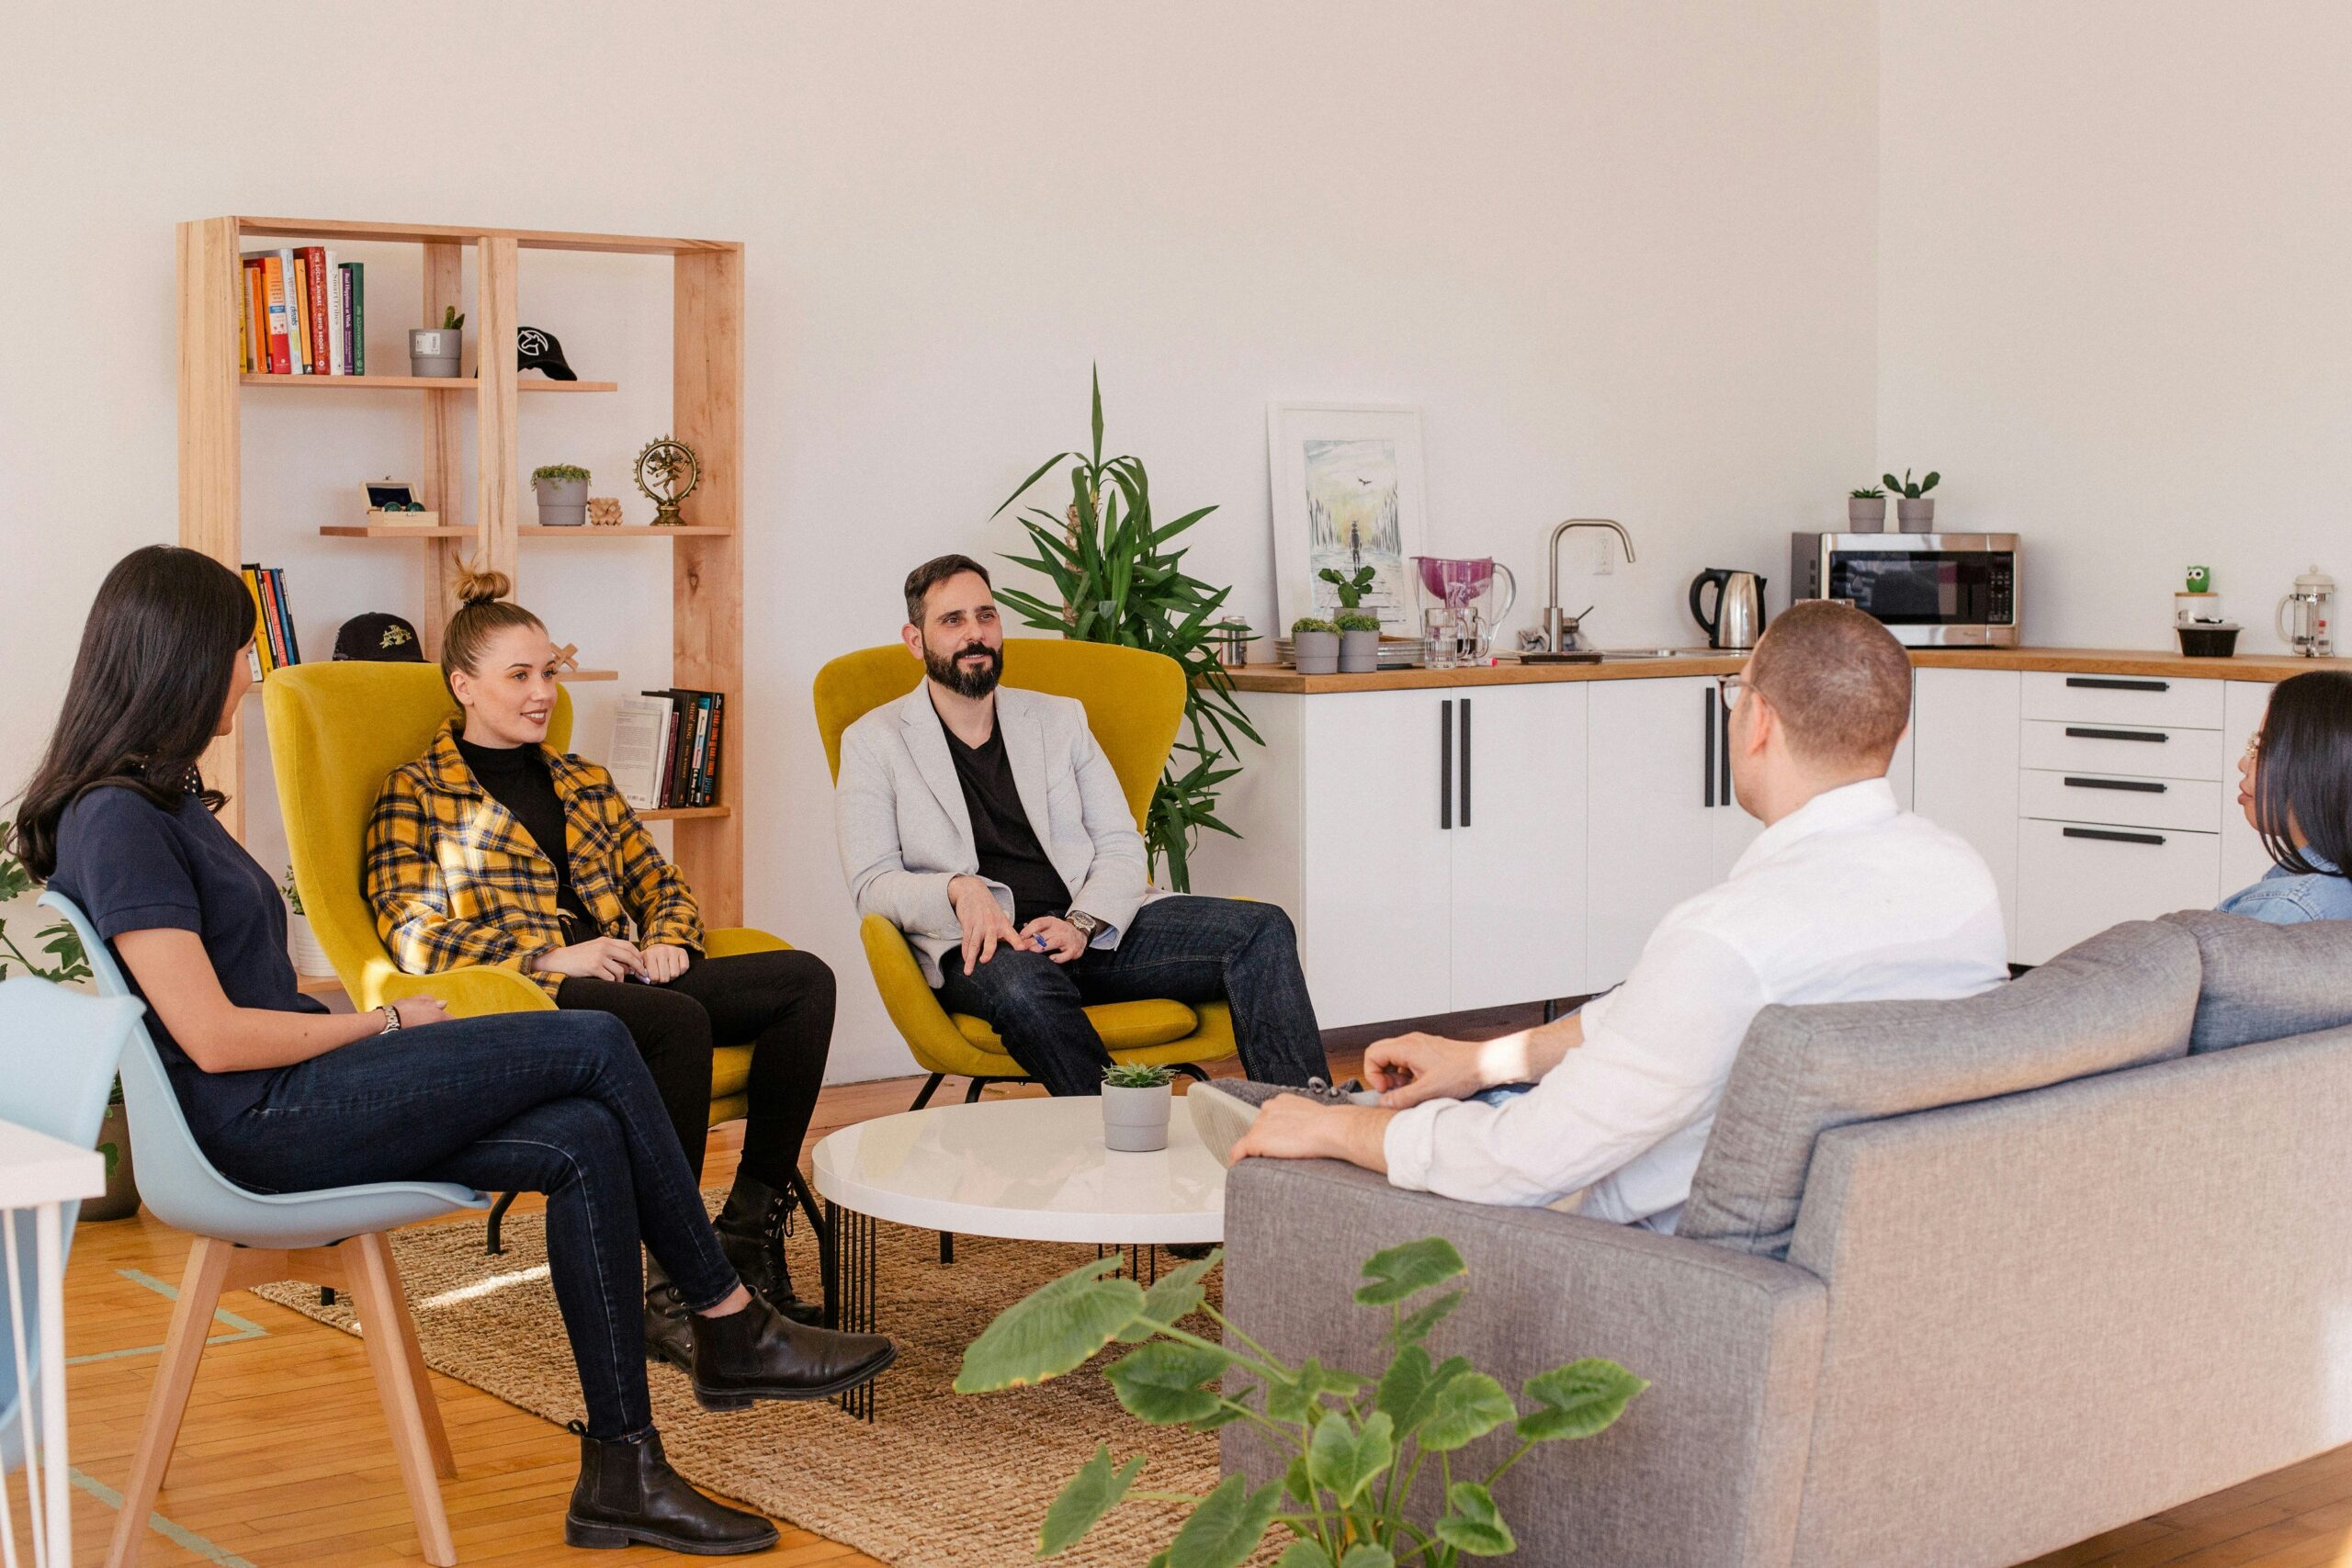 Five adults engage in a conversation about why tech consulting is crucial in a modern office lounge with chairs, a sofa, and plants, creating a relaxed, collaborative atmosphere.